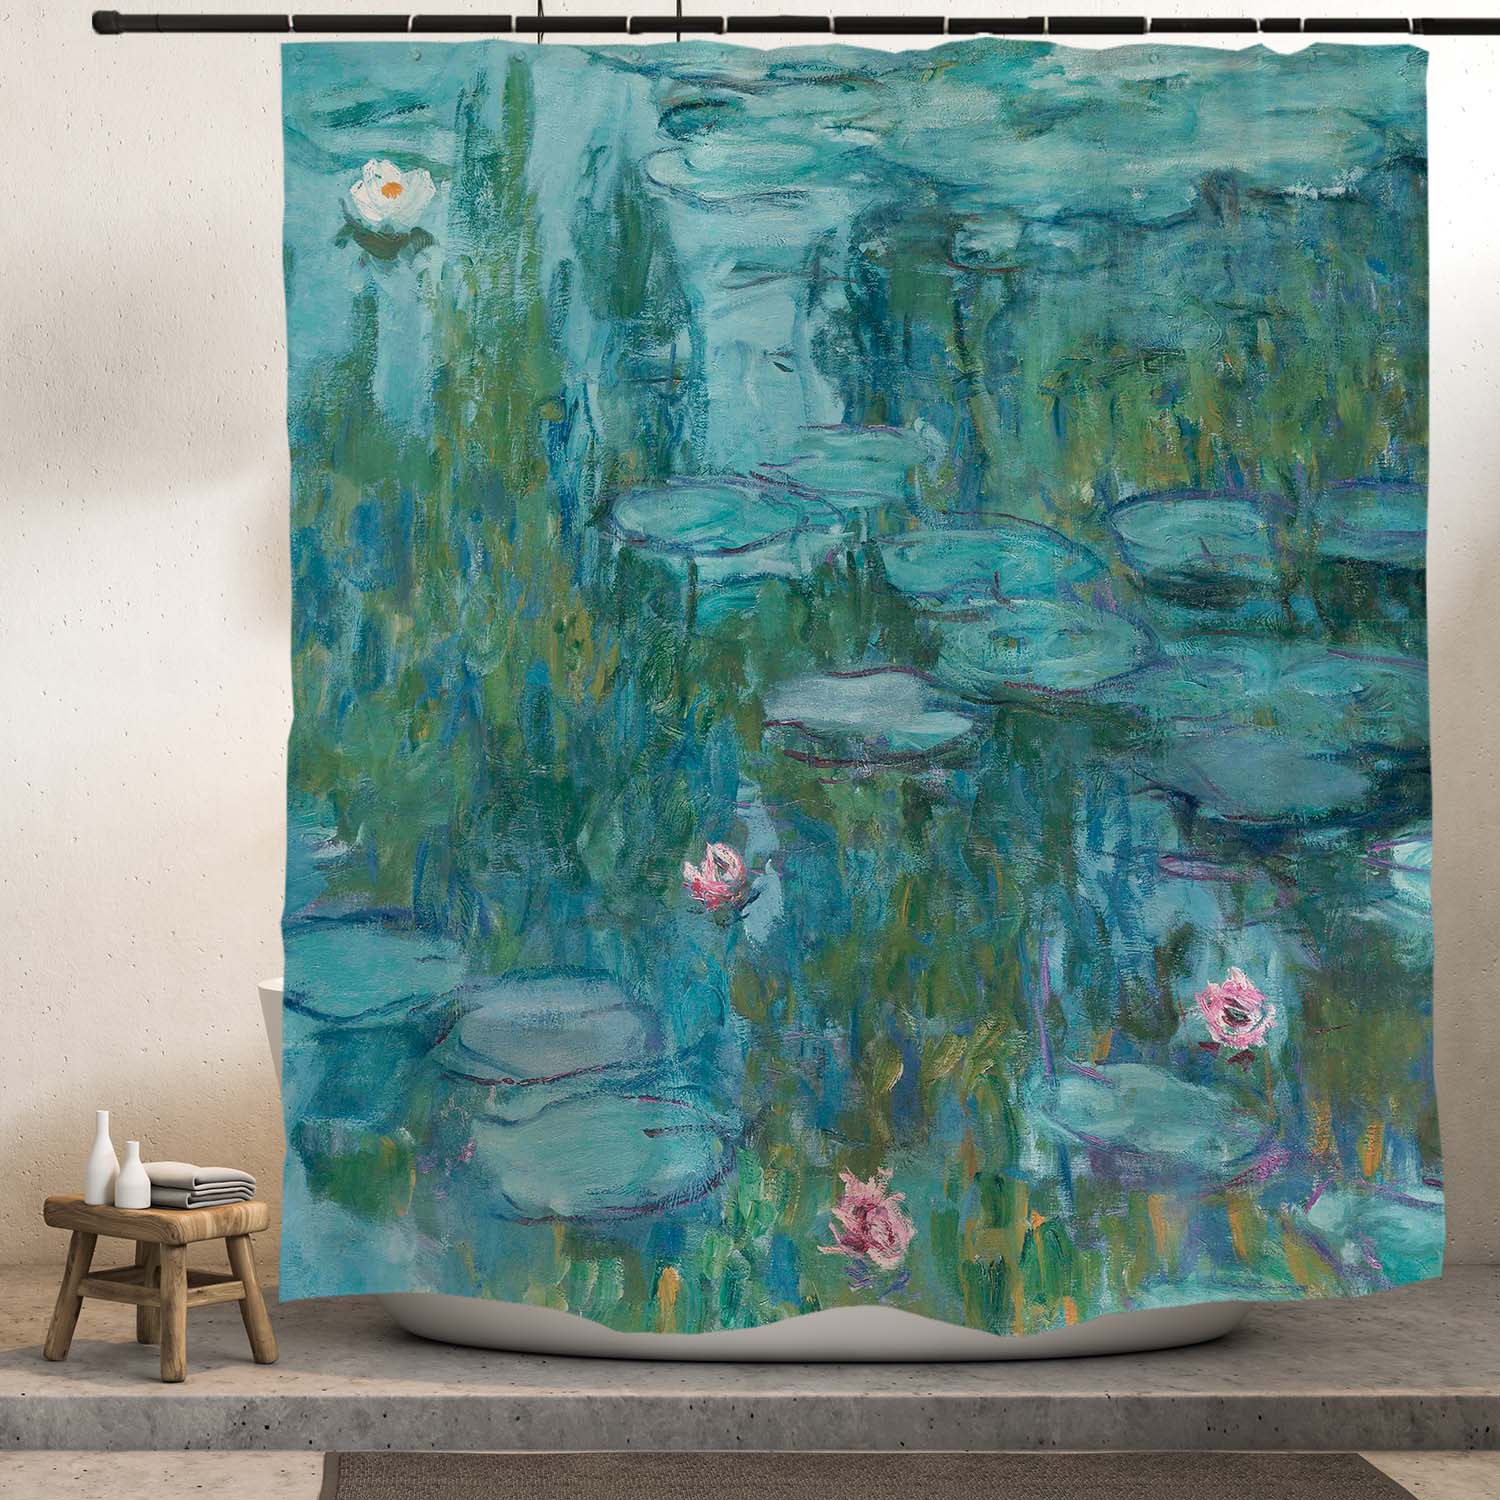 Feblilac Oil Painting Water Lily Shower Curtain with Hooks